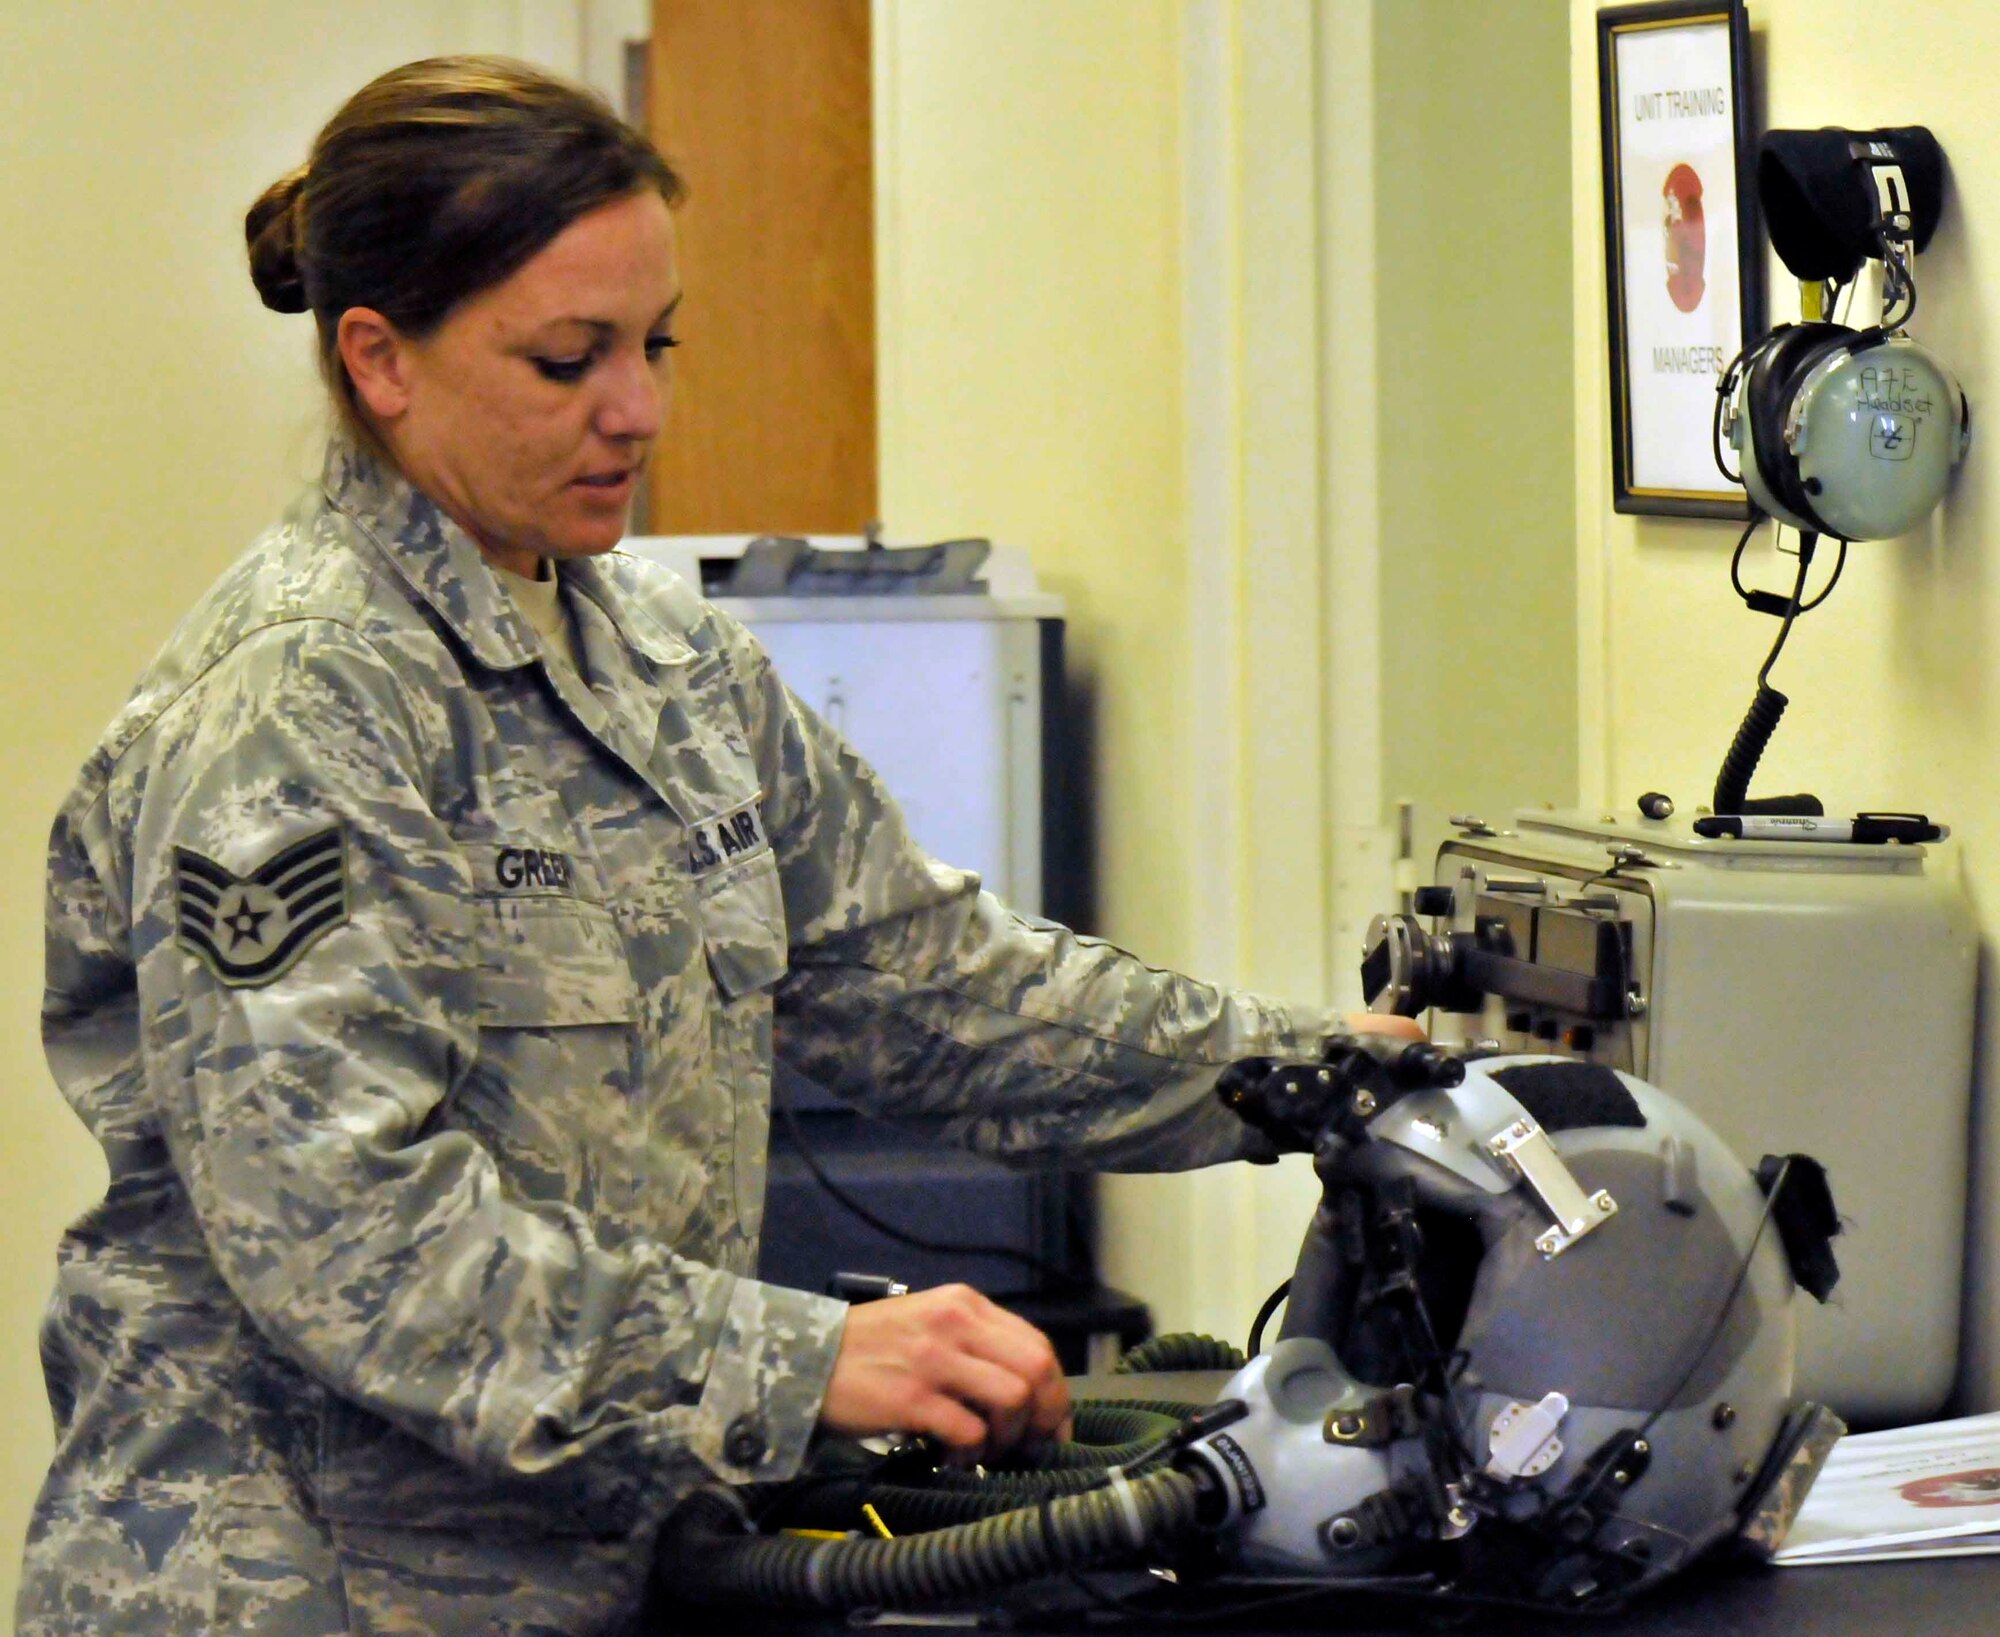 PATRICK AIR FORCE BASE, Fla. - Staff Sgt. Stacie Greer, aircrew flight equipment specialist, runs an operational check on a pilot's helmet following the Cocoa Beach Air Show Nov 5-6. AFE specialists not only run checks on all equipment before and after flights during the air show, but they assist visiting pilots performing in the air show. (U.S. Air Force Photo/Capt. Ryan Liss)